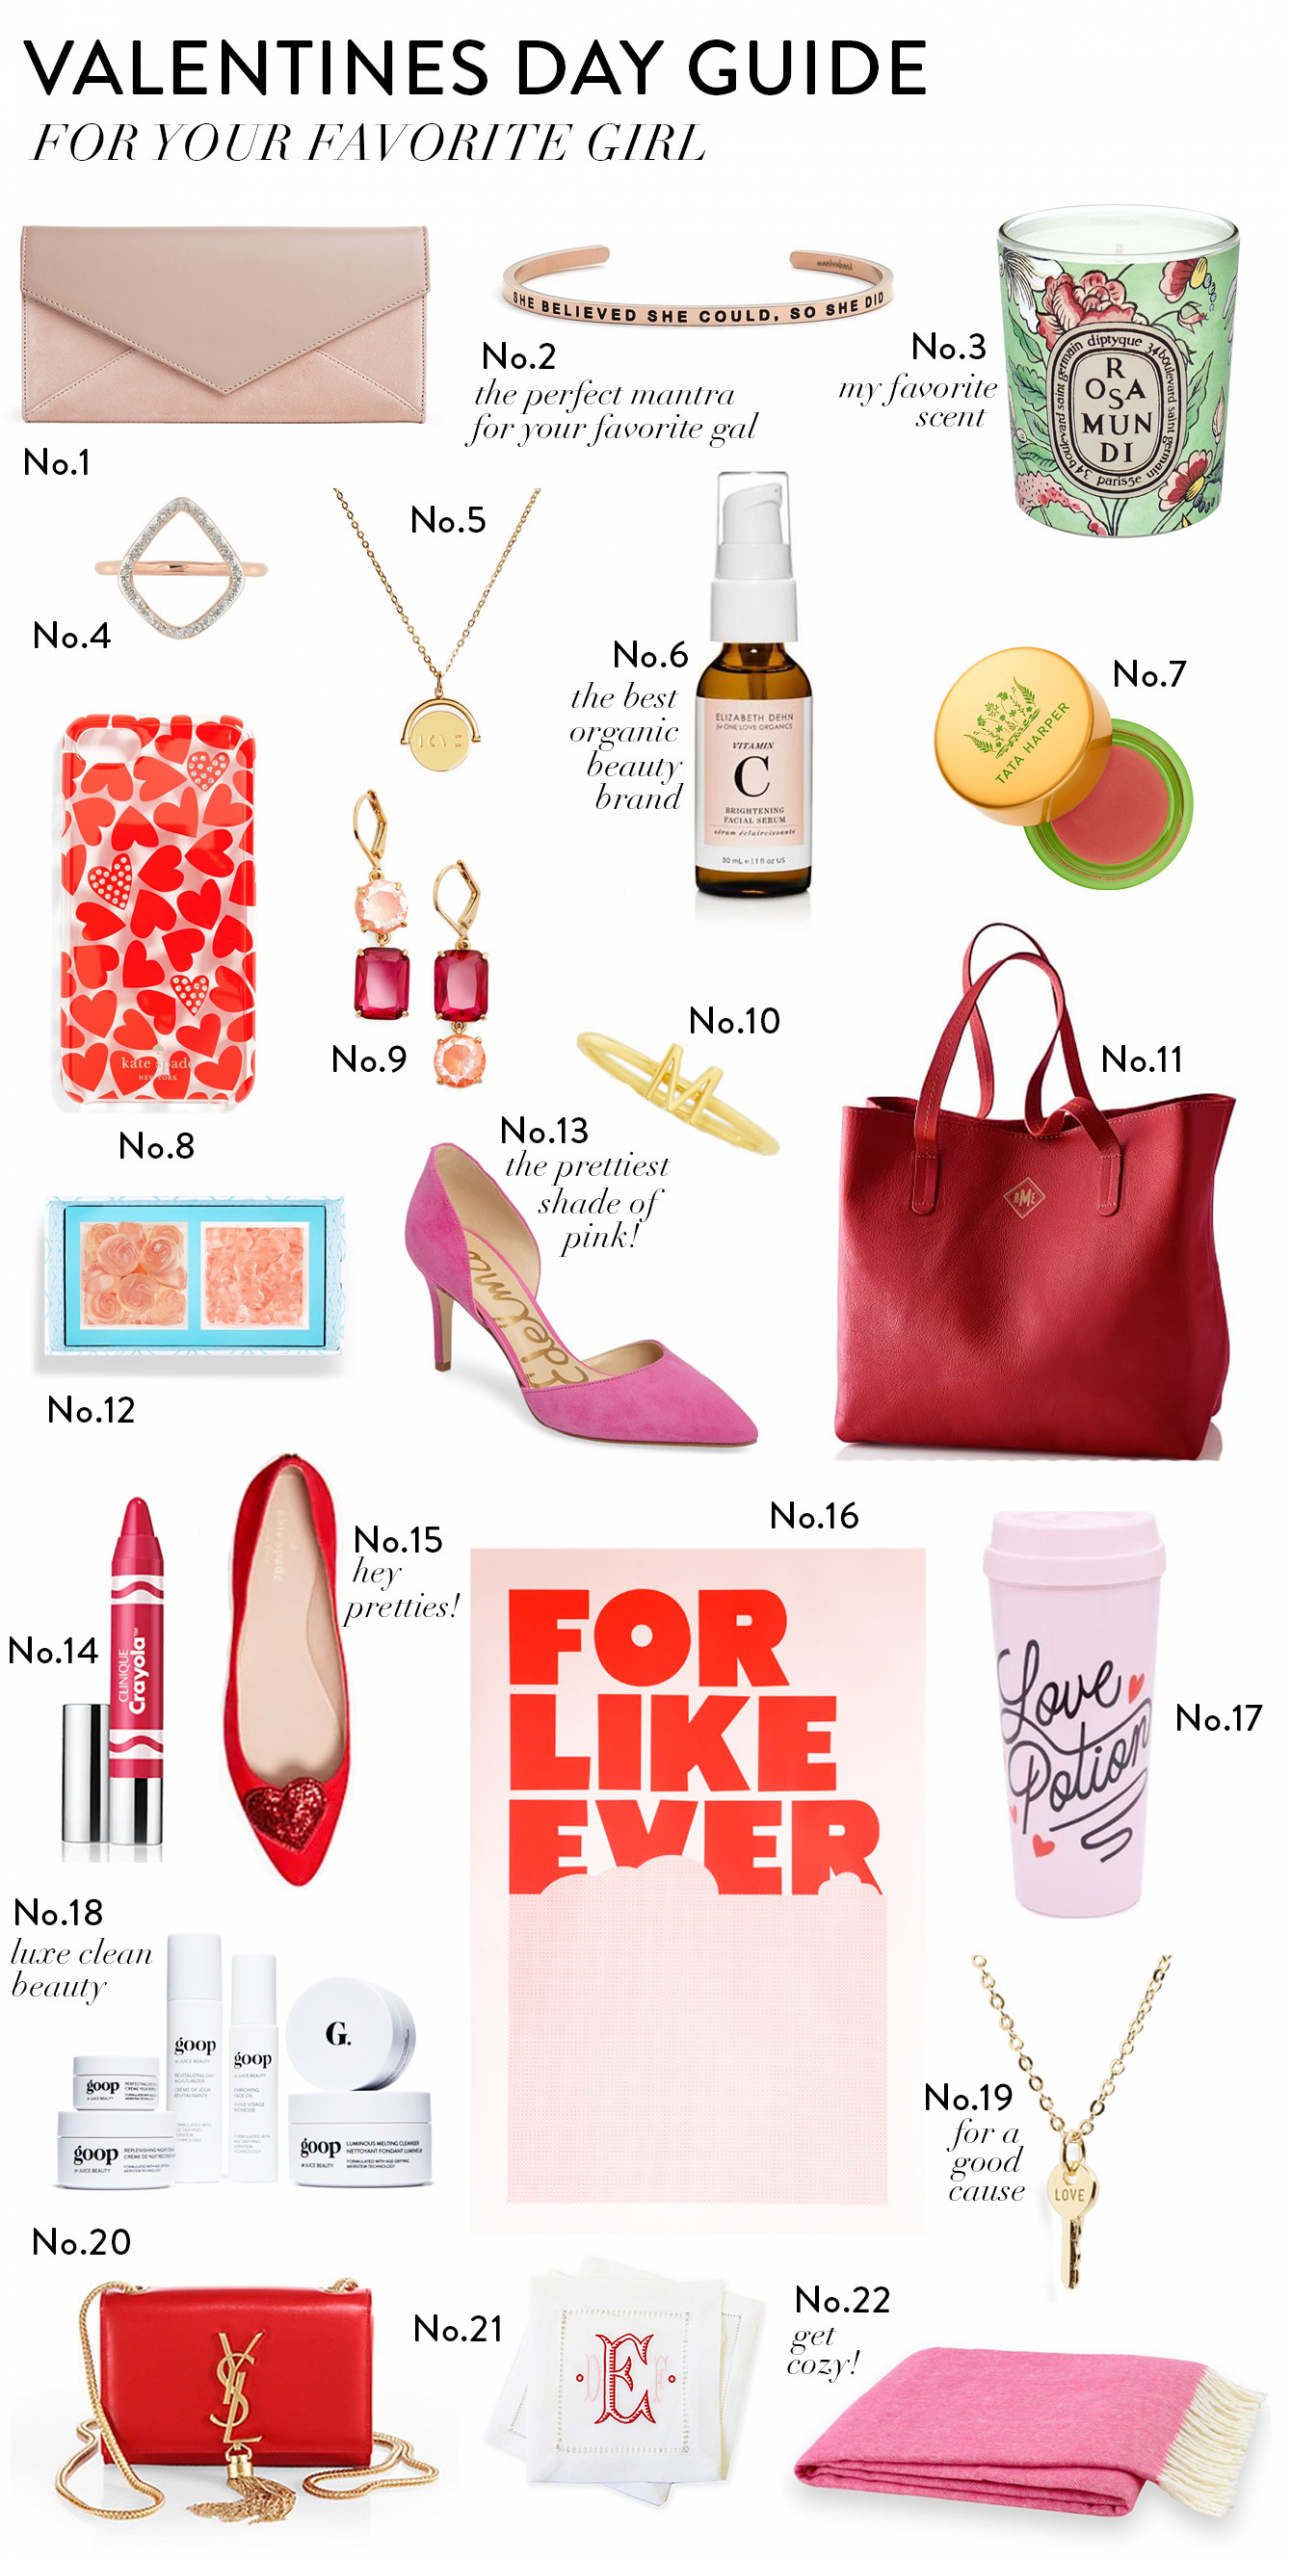 Top Valentines Day Gifts
 The Best Valentines Day Gifts for your Favorite Gal